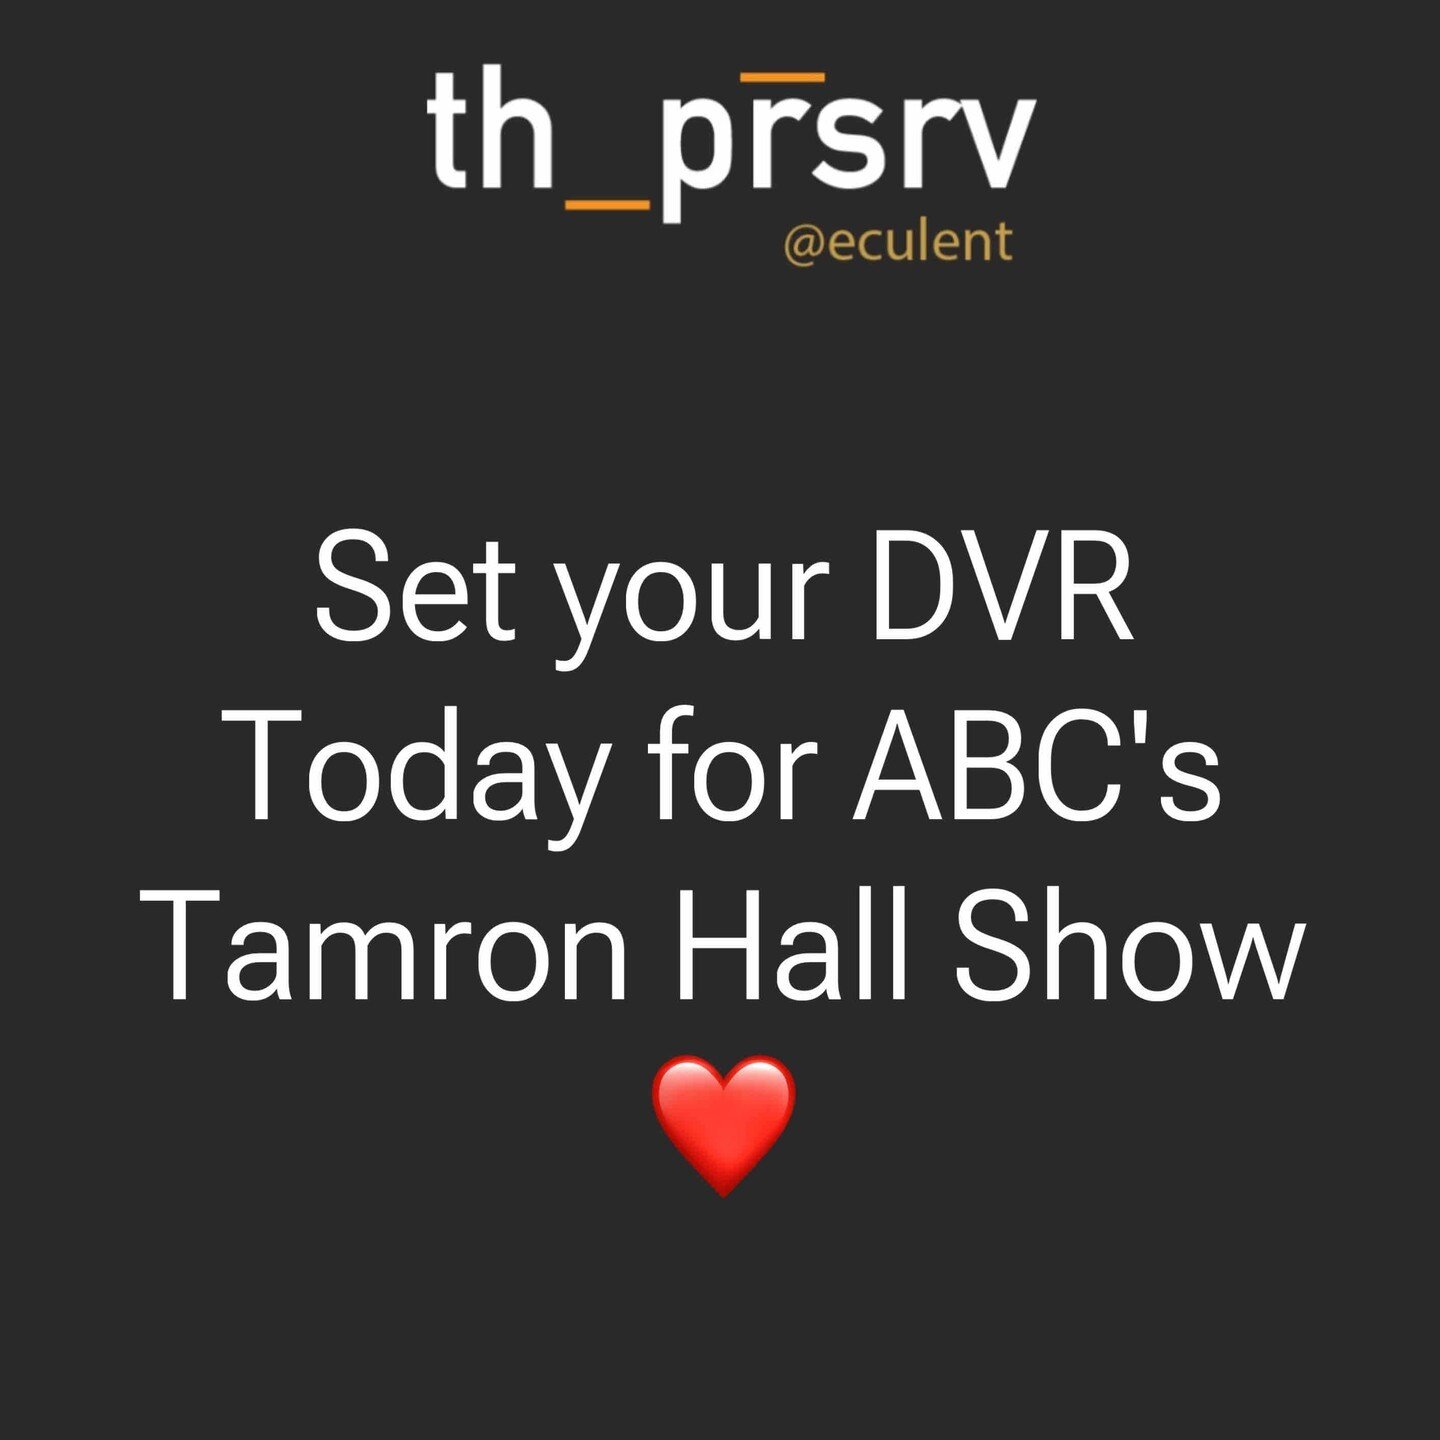 Look for the Tamron&rsquo;s Tasty Table segment! #thprsrv #Kemah #DiningDestination #IndigenousIngredients #NativeFoods #ABCTV #TamronHall #TastyTable come discover what the first is all about make your reservation at https://thprsrv.com